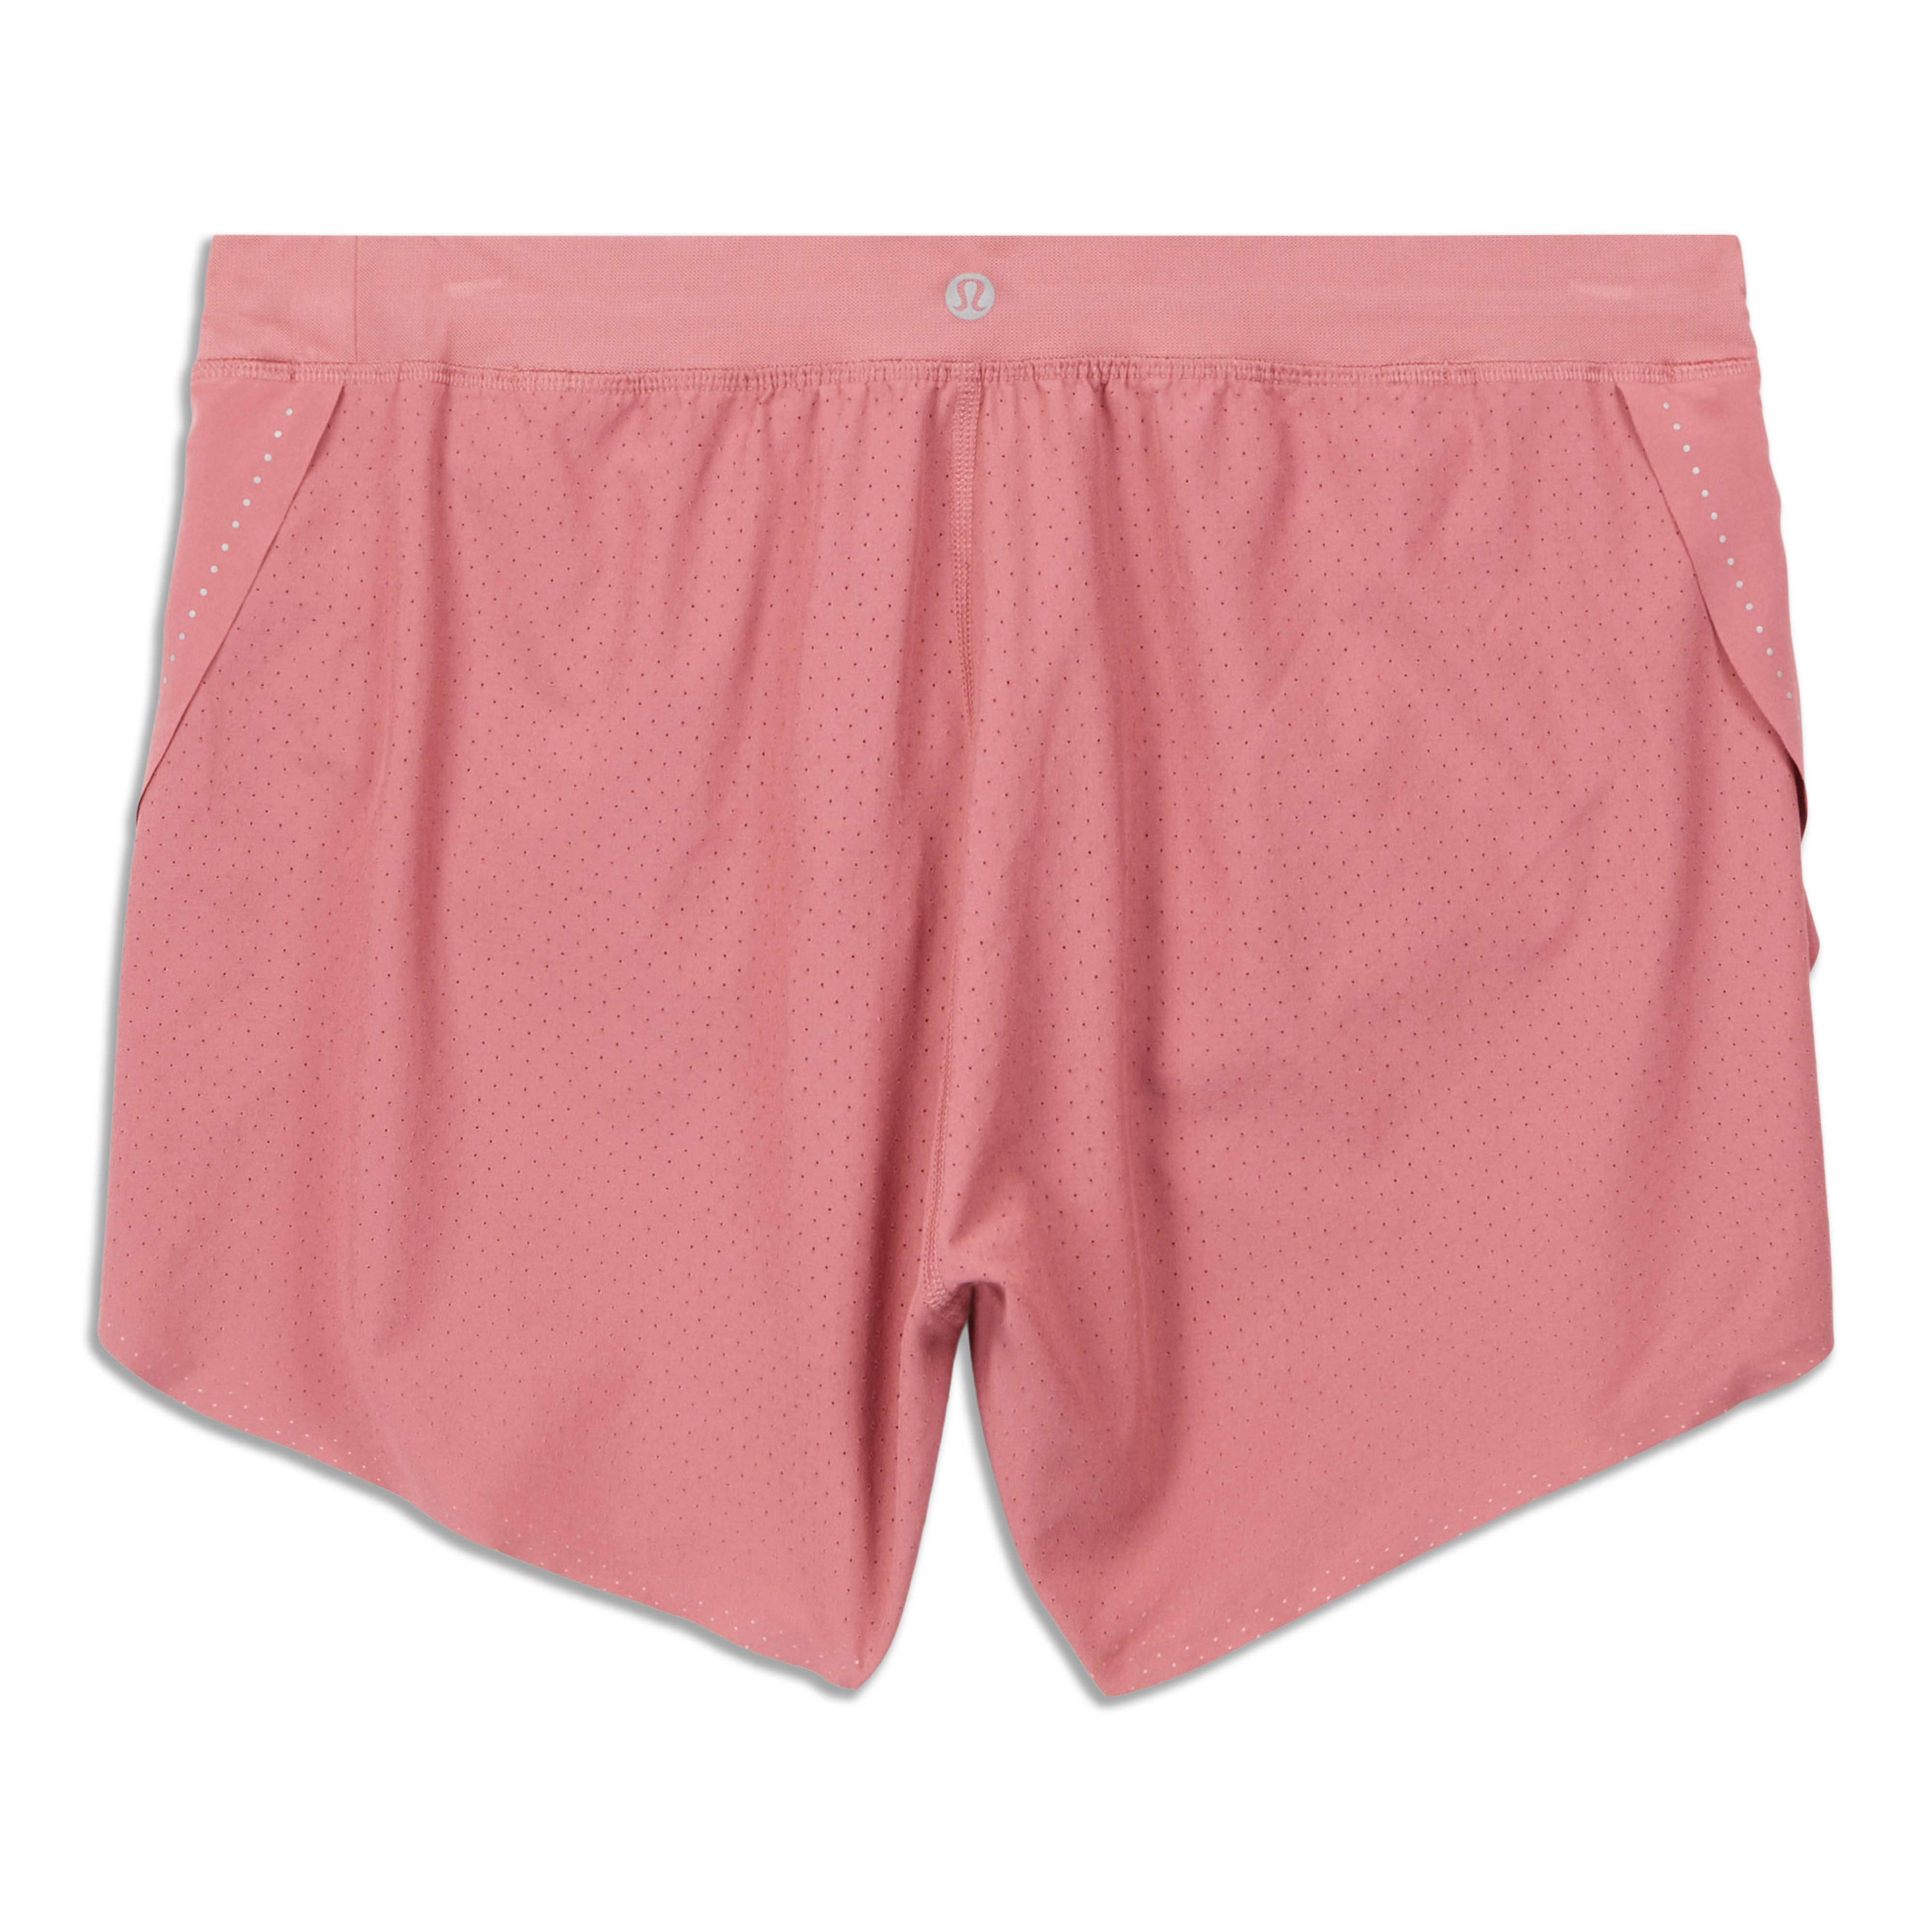 Essential run HR short 4” (Pow Pink) - size comparison 4 vs 2. To each  their own but I decided to go with size 2 as size 4 is doing nothing for my  figure : r/lululemon